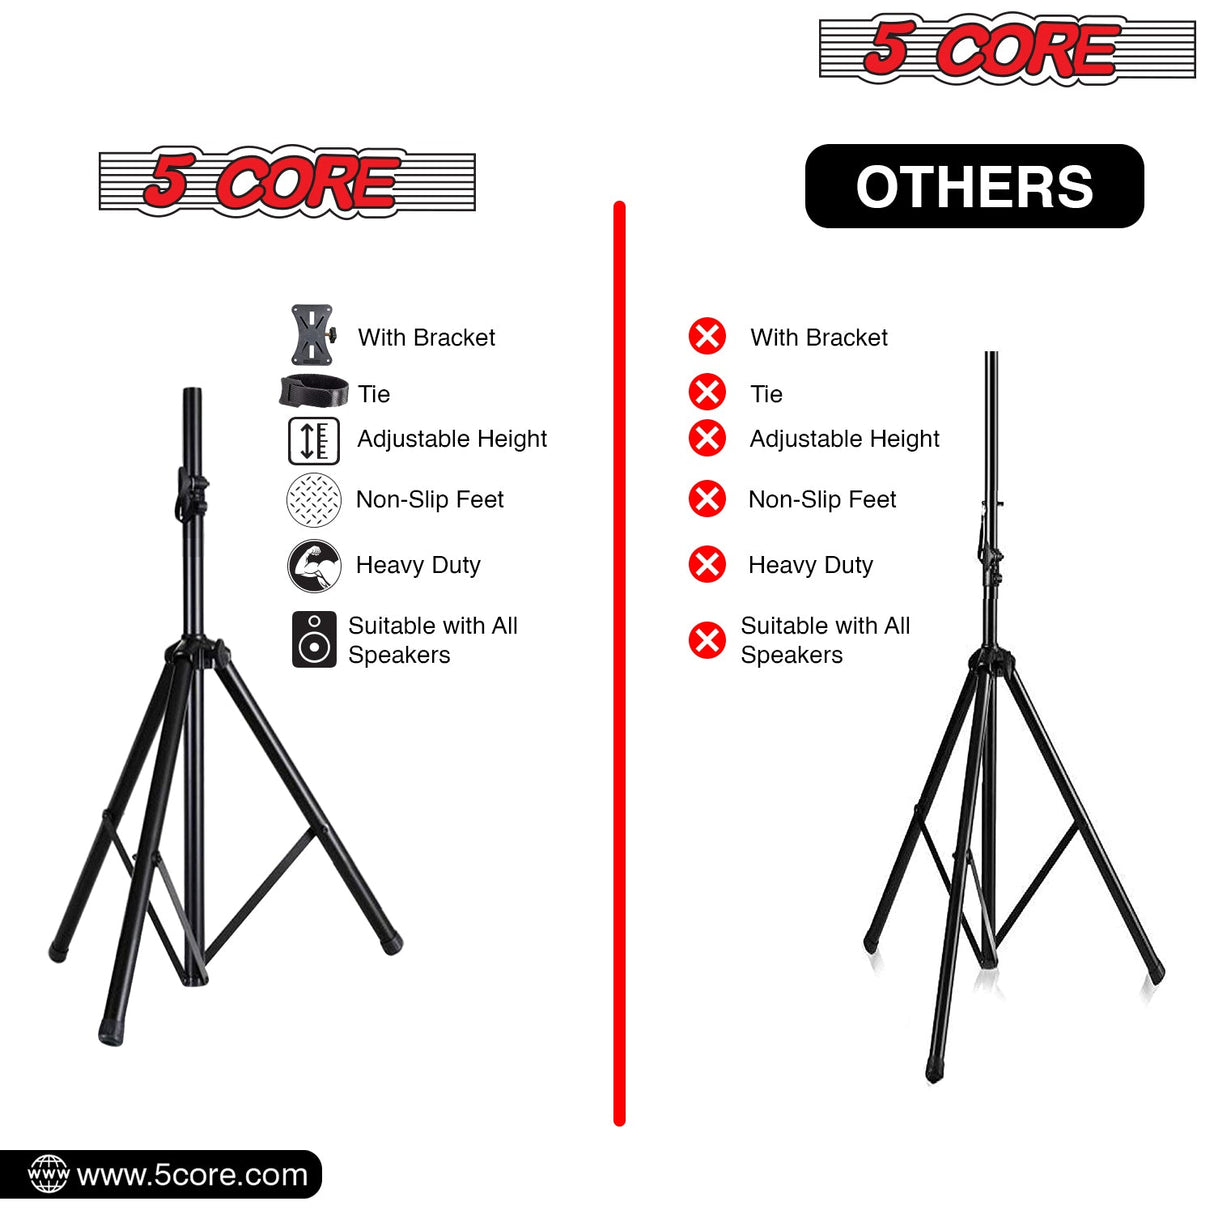 5 Core 2 Pieces PA Speaker Stands Adjustable Height Professional Heavy Duty DJ Tripod with Mounting Bracket, Tie and Carrying Bag, Extend from 41 to 72 inches, Black - Supports 132 lbs SS HD 2PK BLK WOB